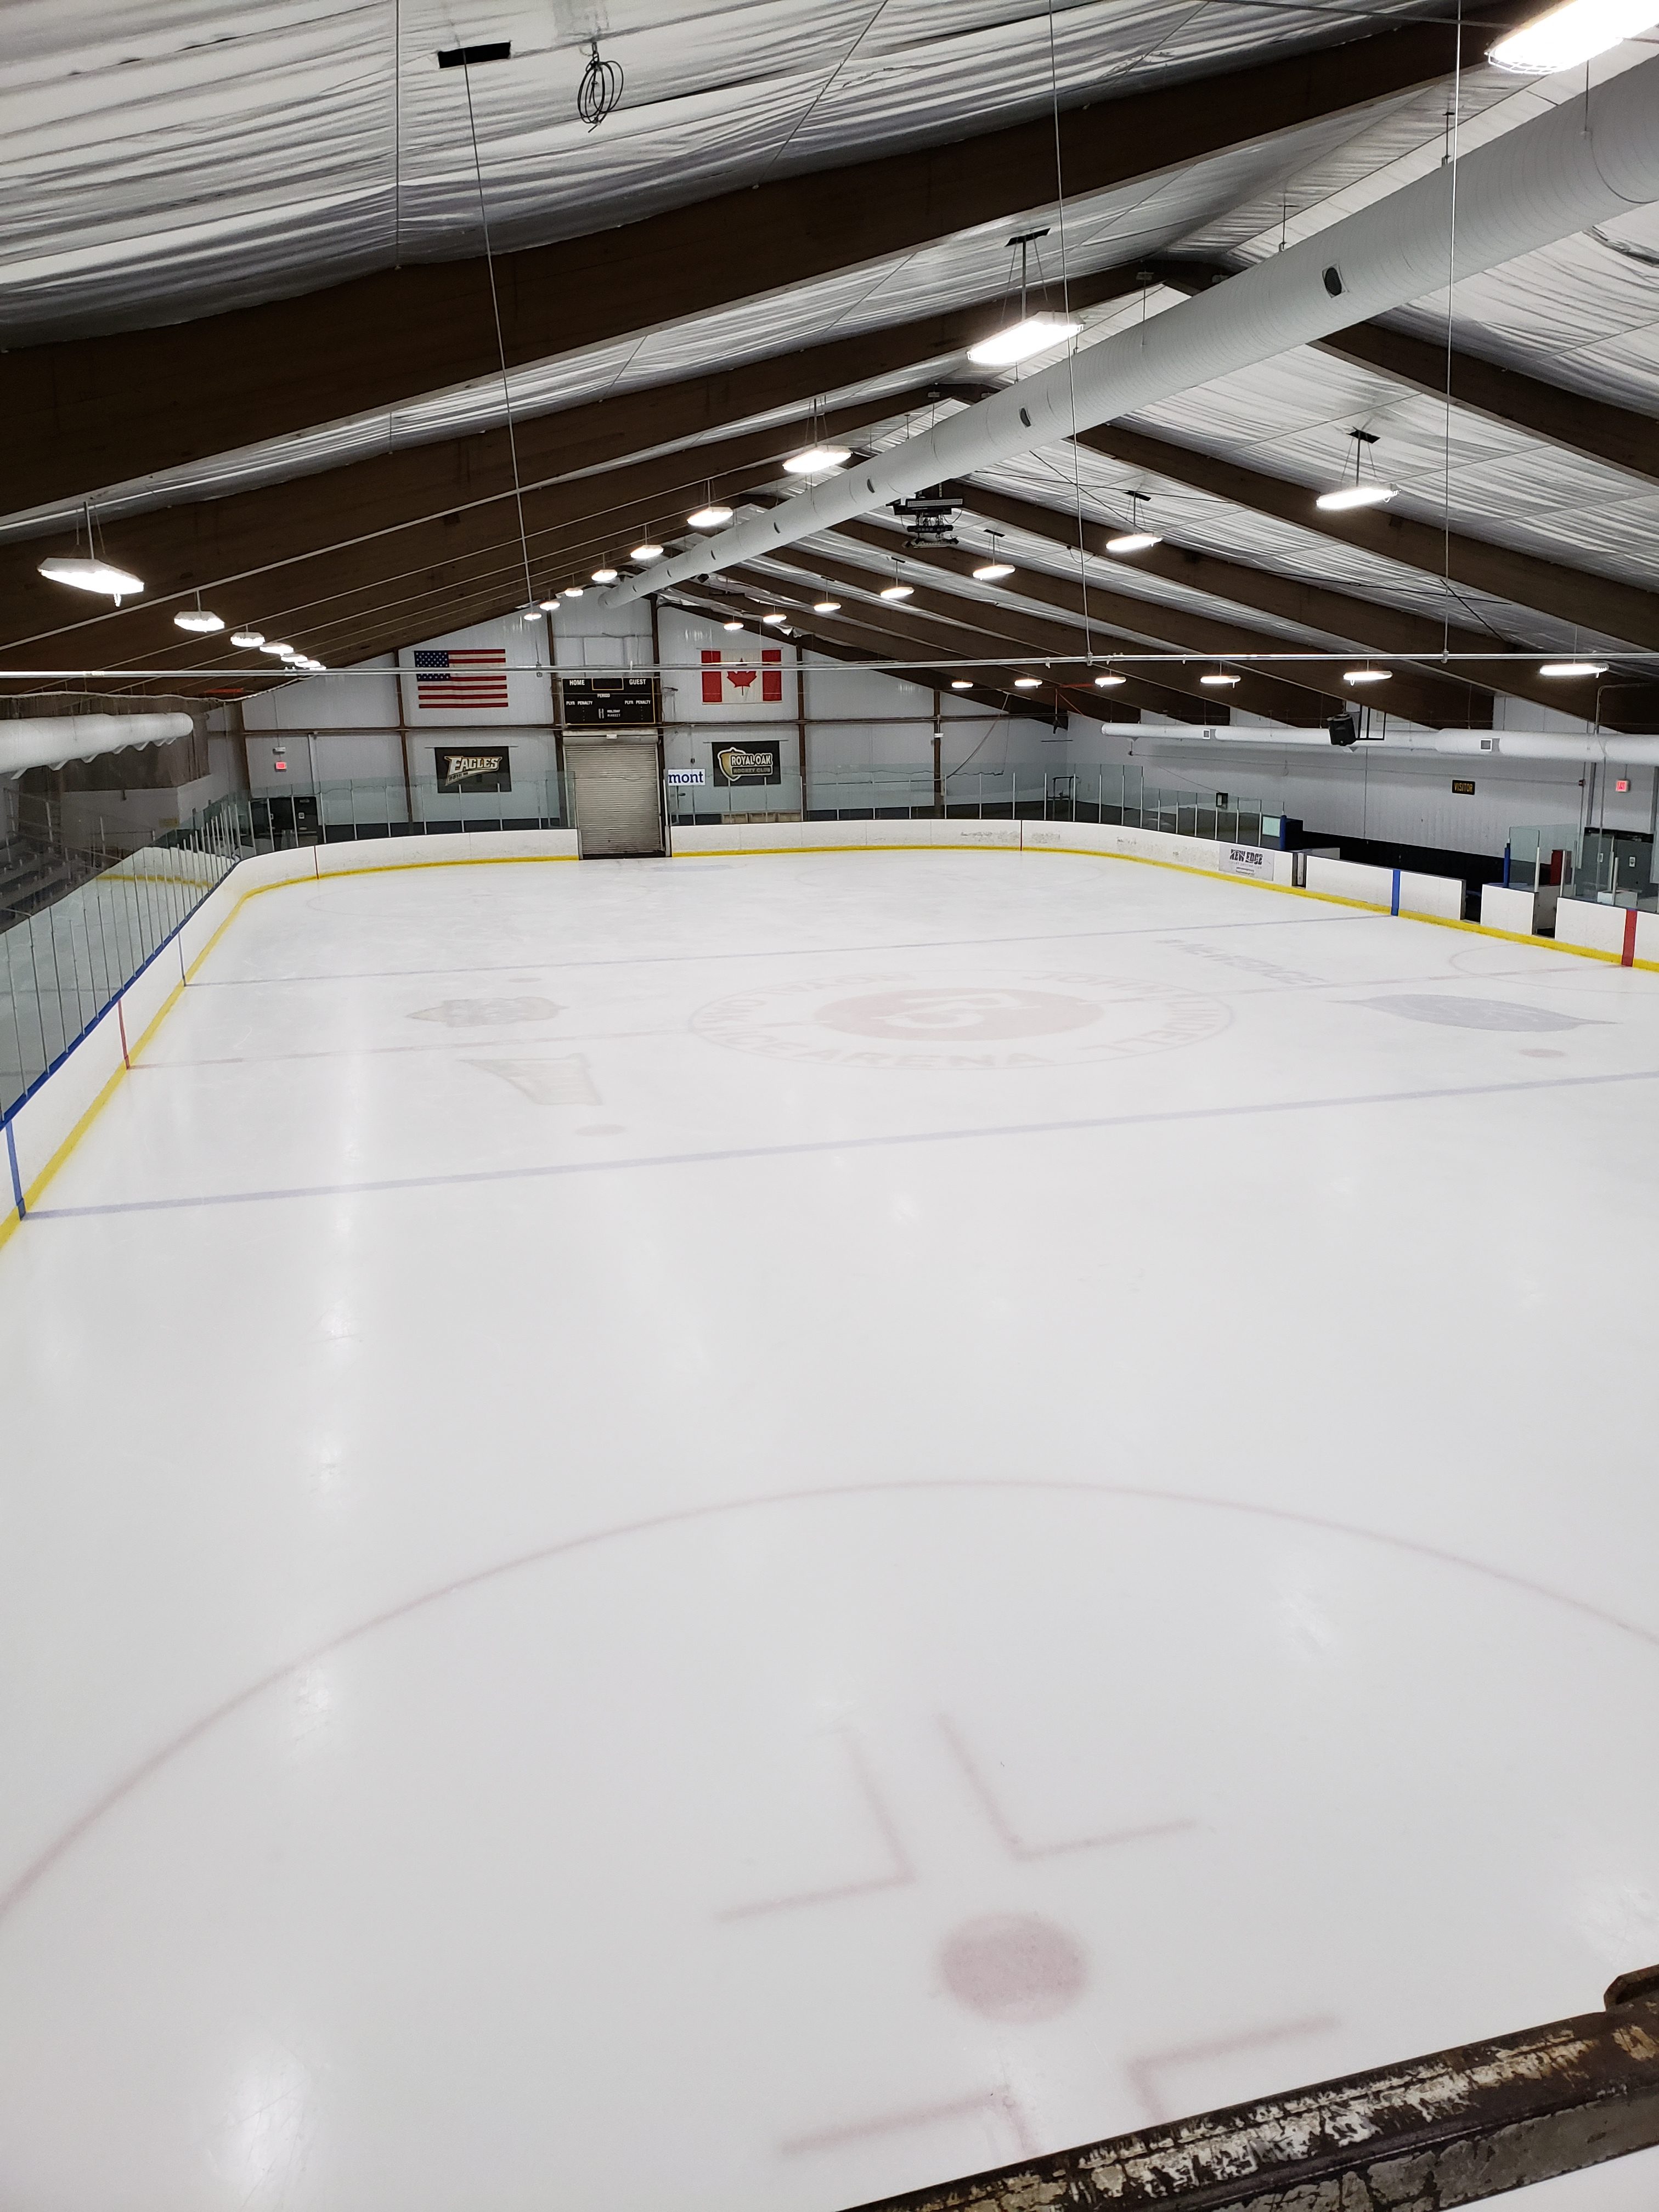 Post LED conversion picture of John Lindell Ice Arena.